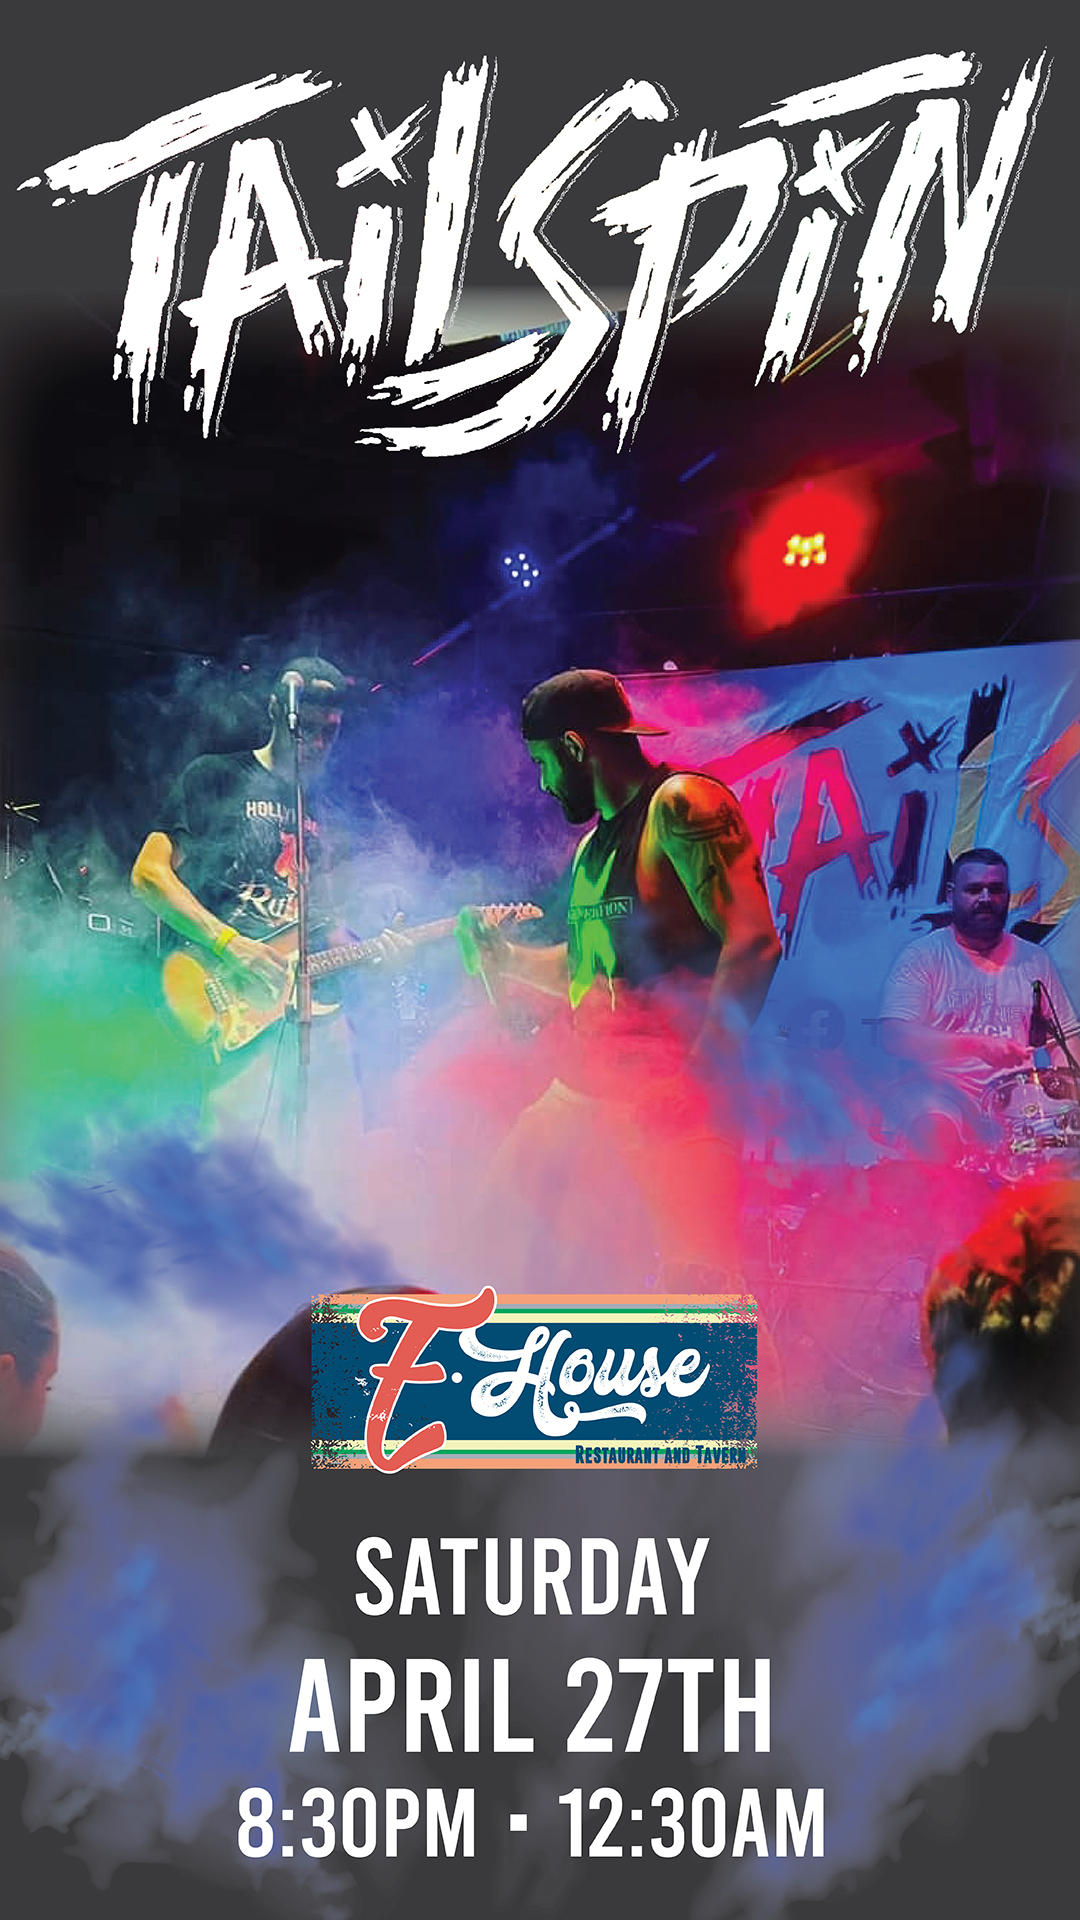 Promotional poster for tailspin band's live performance at e-house on saturday, april 27th from 8:30 pm to 12:30 am, featuring energetic stage presence.